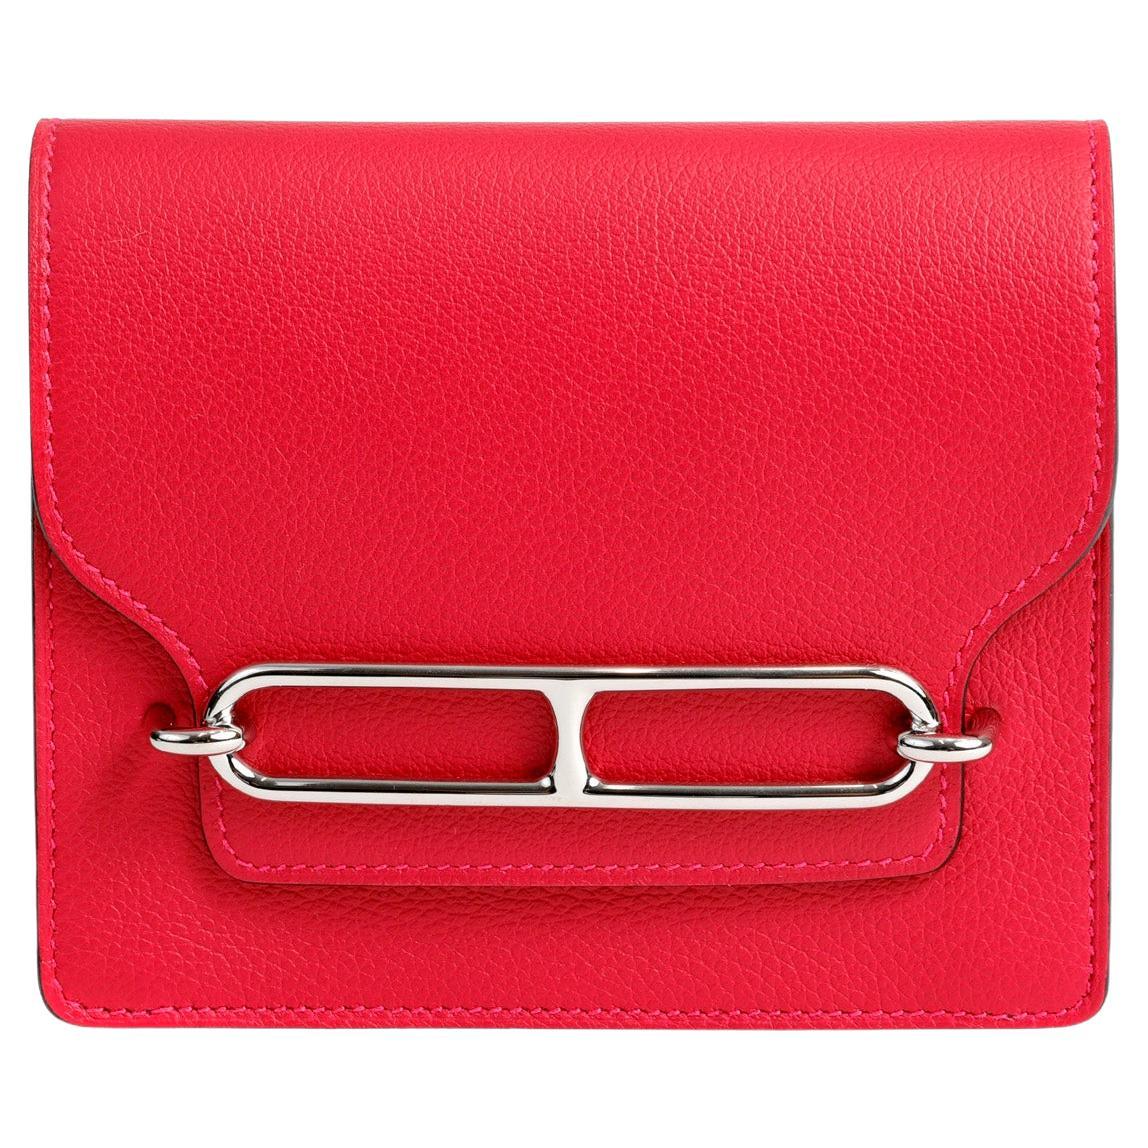 Top more than 254 rose red purse super hot